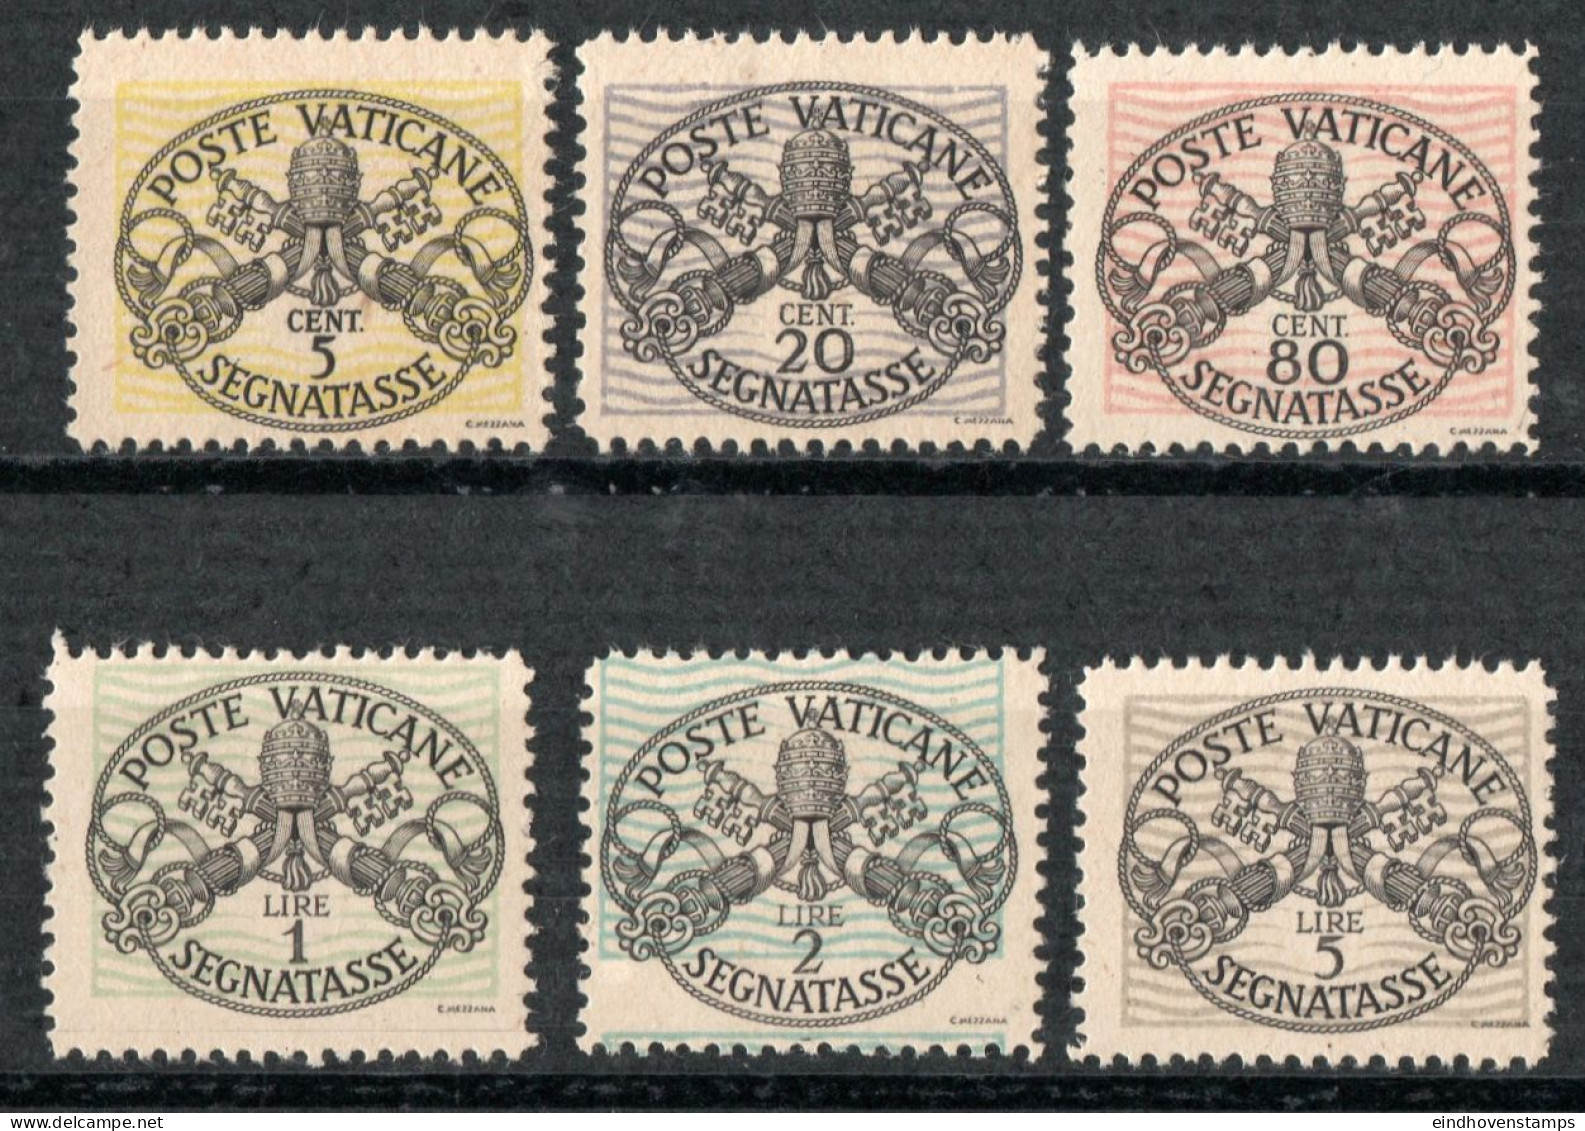 Vatican 1945, Postage Due 5c - 5 L Small Coloured Lines 6 Values Mi P7-12 X I MNH - For Comparison With Types II - Postage Due